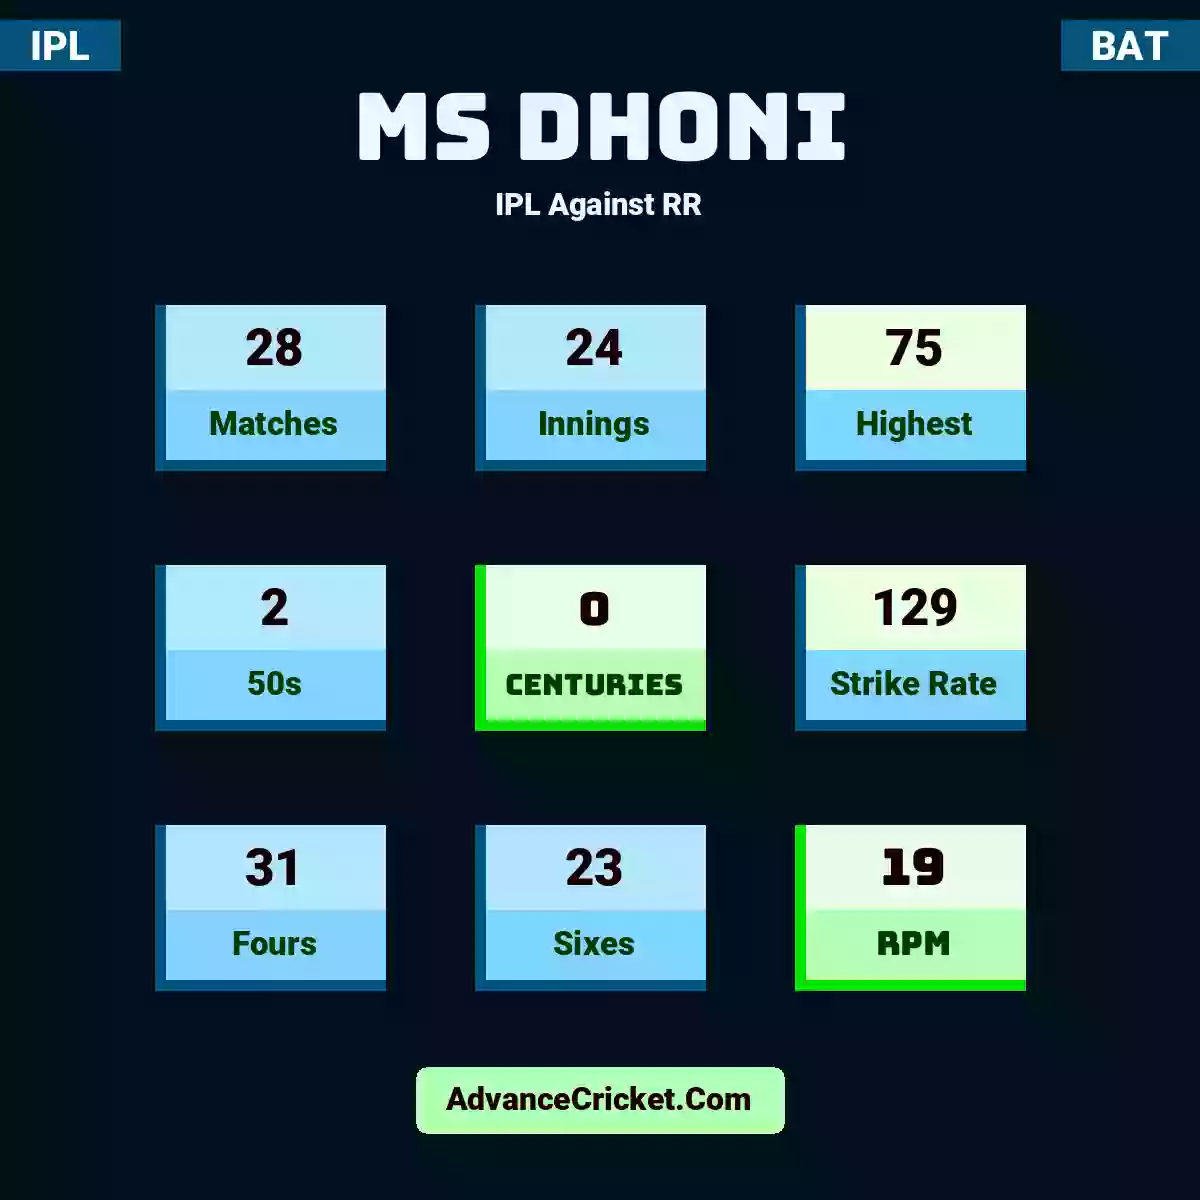 MS Dhoni IPL  Against RR, MS Dhoni played 28 matches, scored 75 runs as highest, 2 half-centuries, and 0 centuries, with a strike rate of 129. M.Dhoni hit 31 fours and 23 sixes, with an RPM of 19.